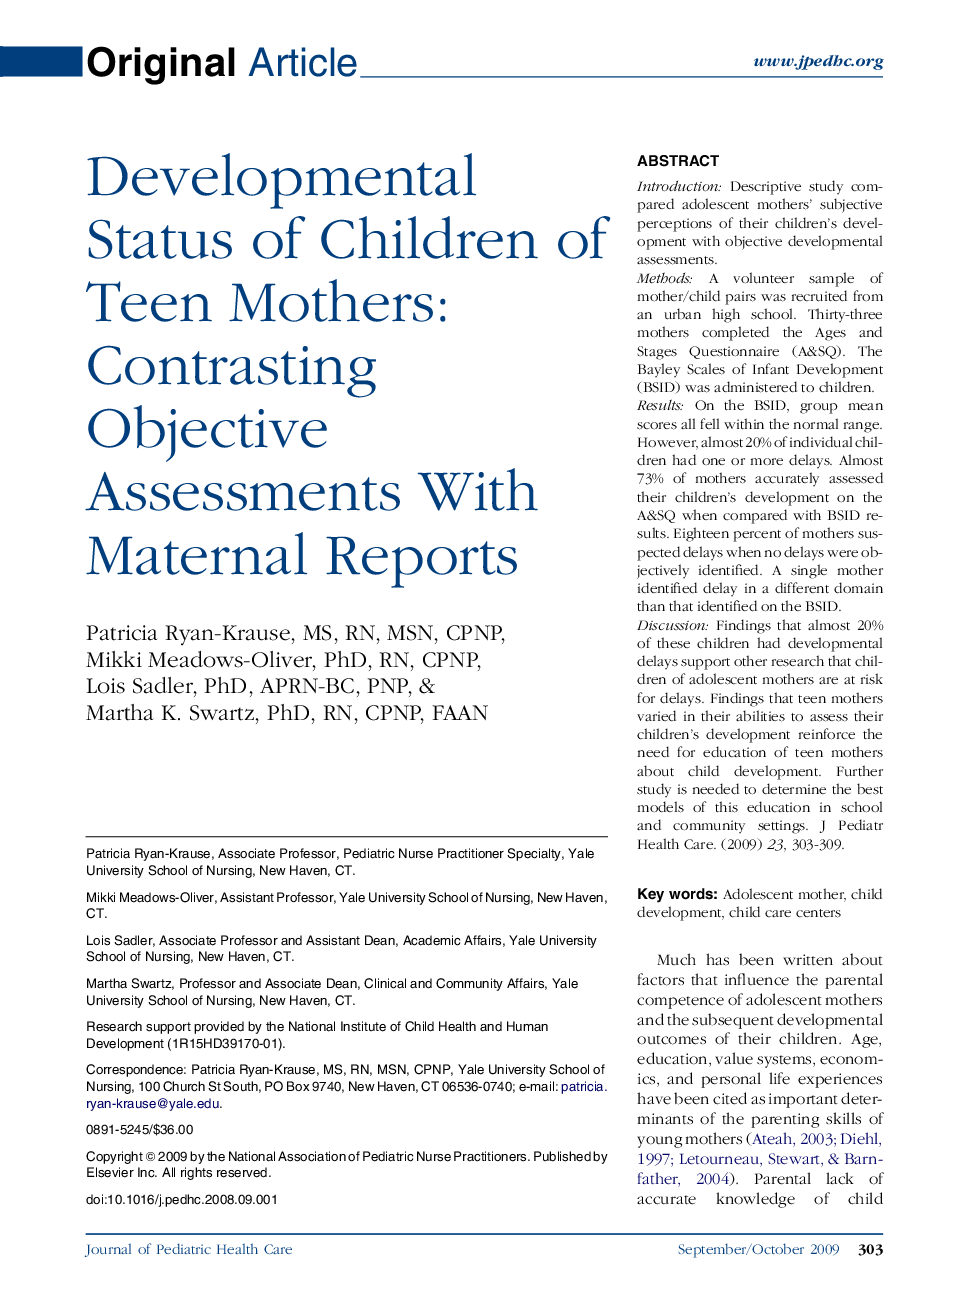 Developmental Status of Children of Teen Mothers: Contrasting Objective Assessments With Maternal Reports 